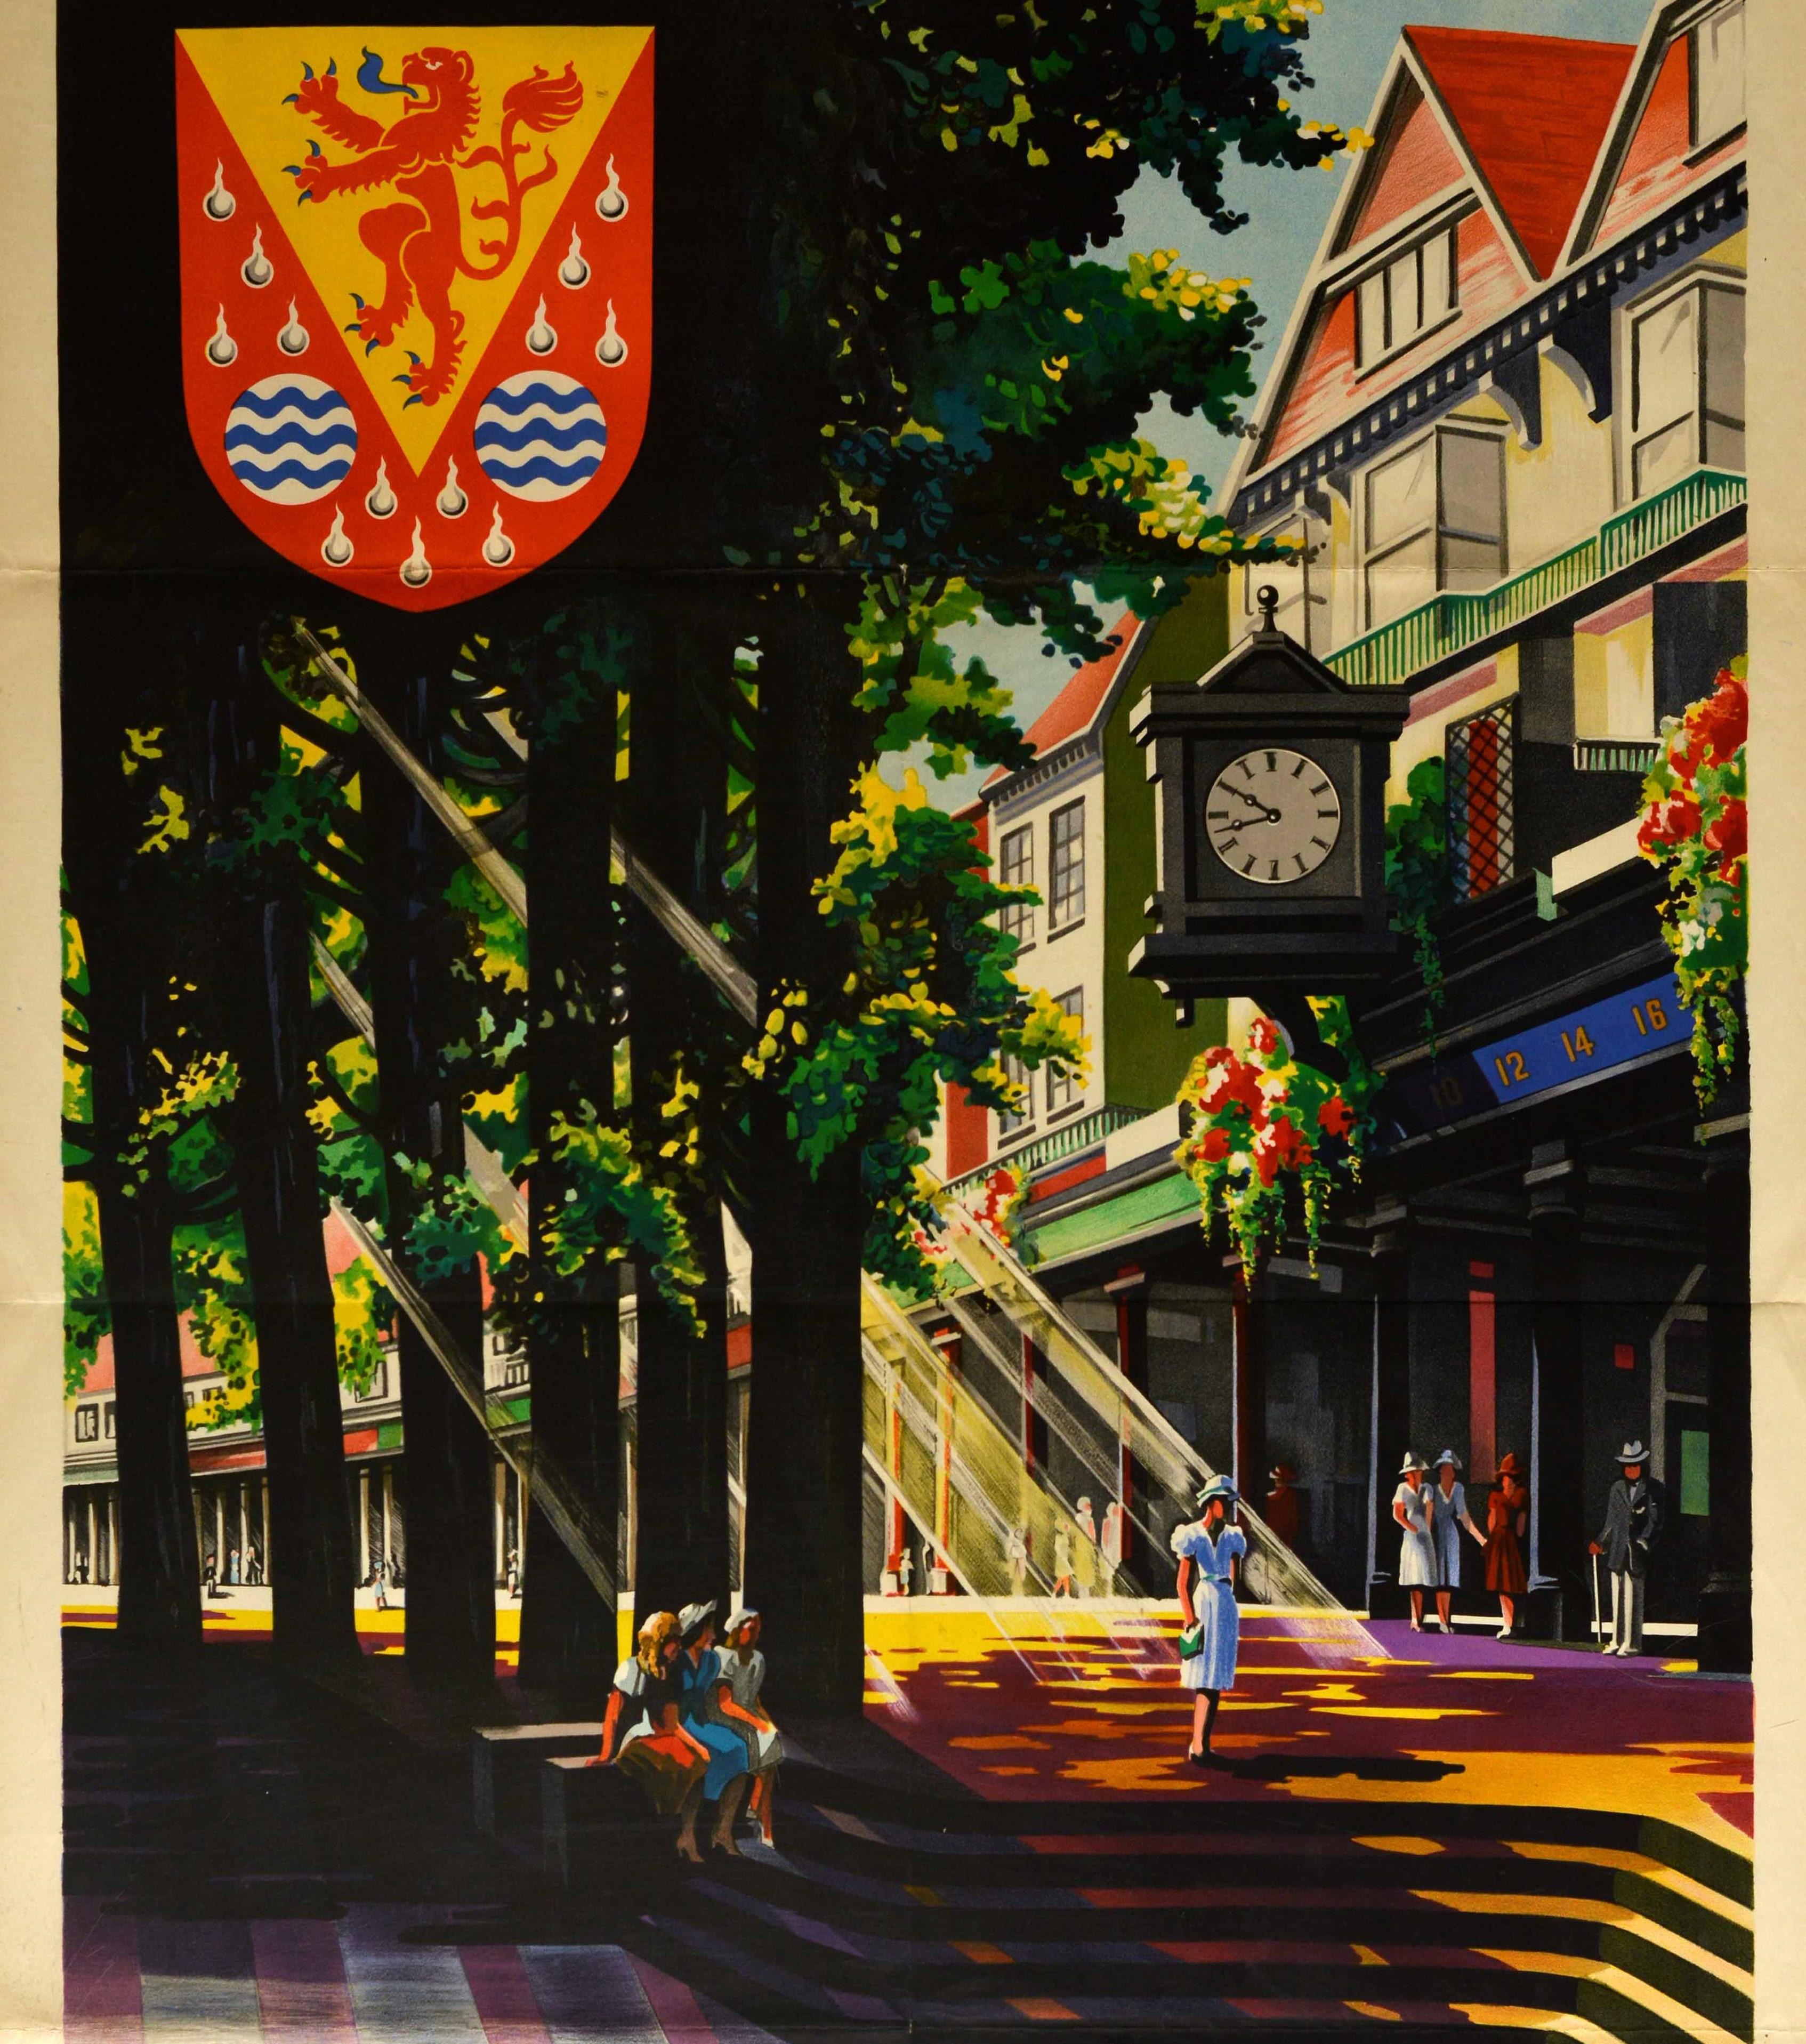 Original vintage Southern Railway poster for Royal Tunbridge Wells in Kent featuring colorful artwork by Charles Shepard (1844-1924; 'Shep') showing a scenic view of the Tunbridge Wells High Street with sunlight shining through the tall trees to